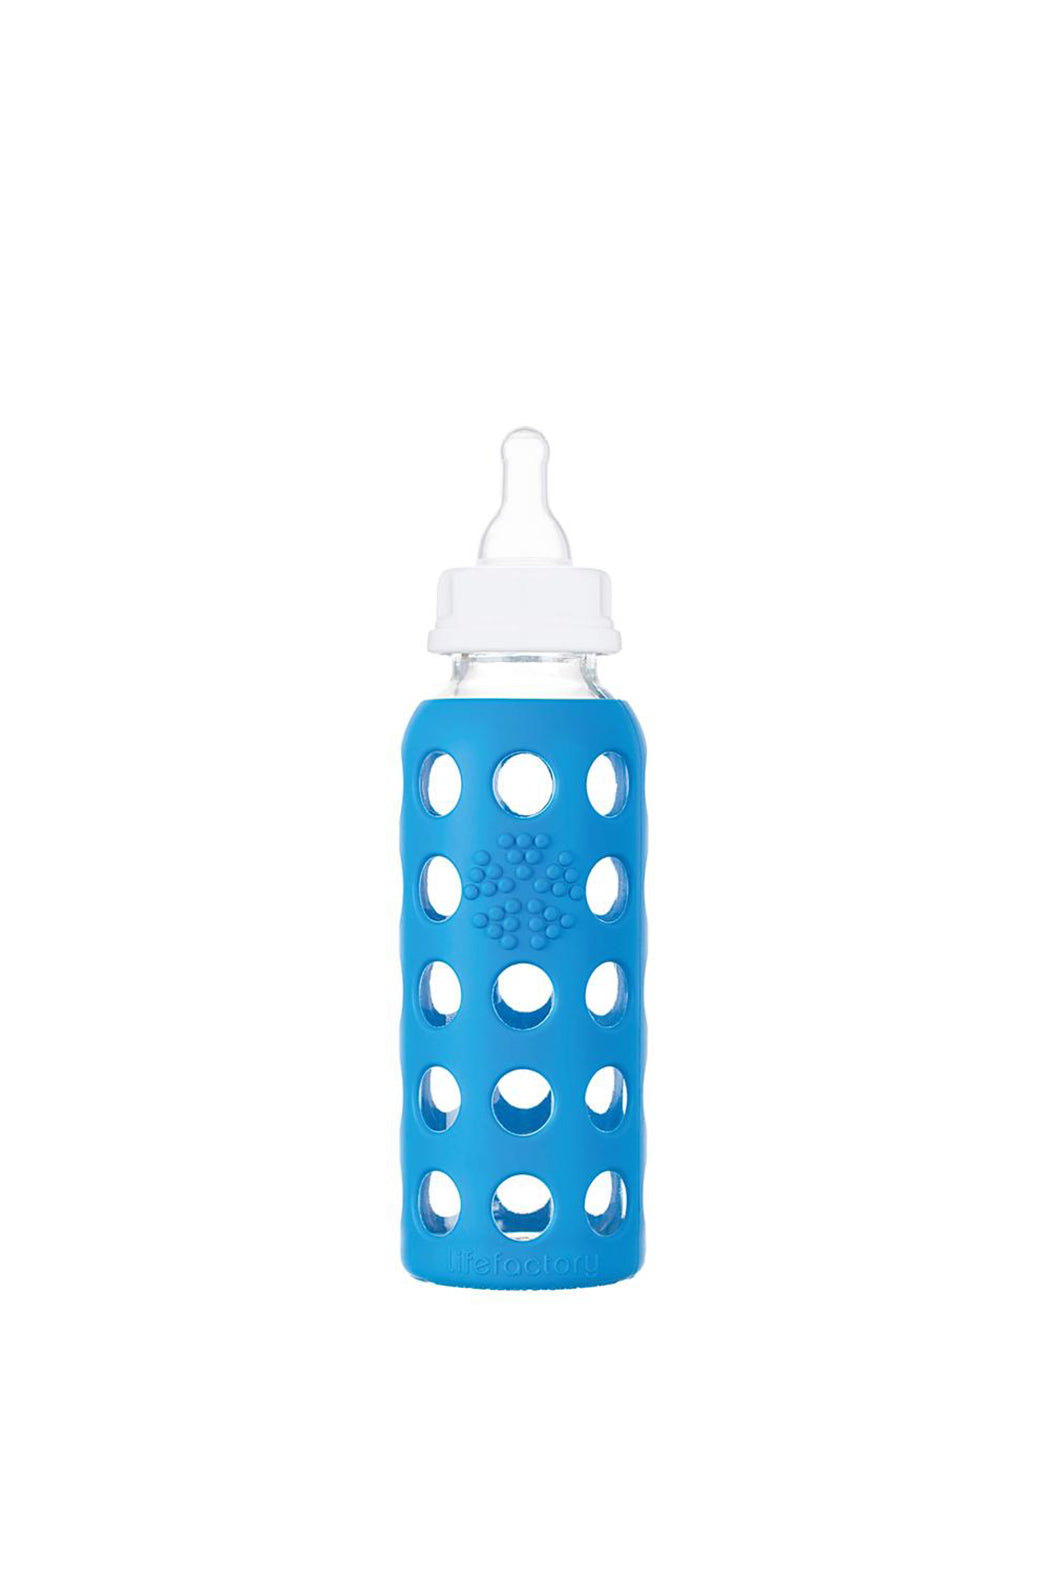 Lifefactory 9oz Glass Baby Bottle With Silicone Sleeve